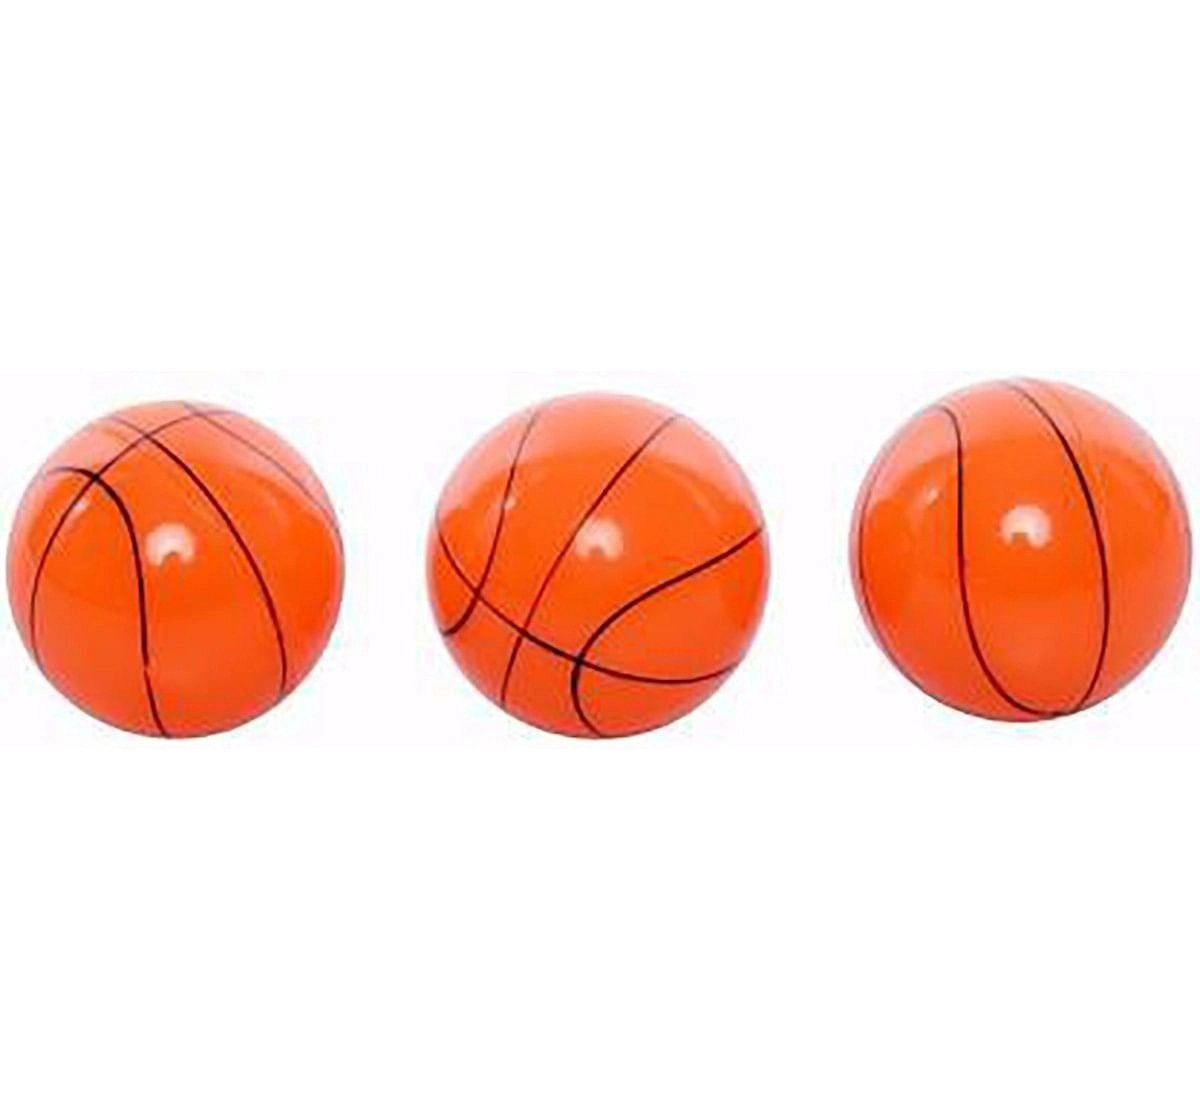 Hostfull Basketball Game With Score 2-Players Indoor Sports for Kids age 5Y+ 